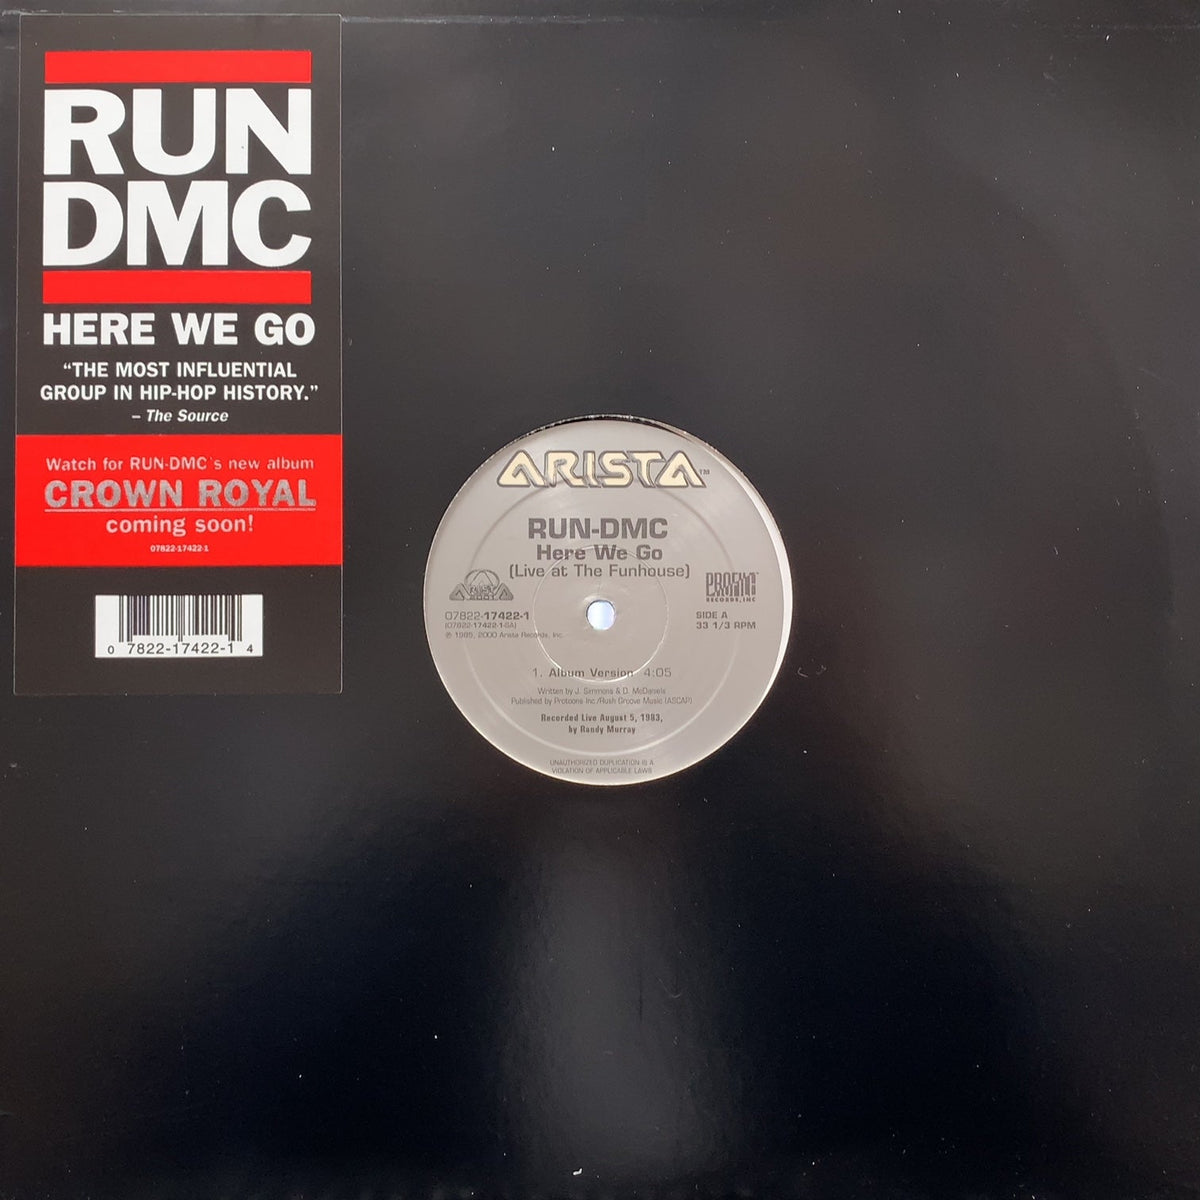 RUN D.M.C. / Here We Go (Live At The Funhouse) 07822-17422-1, 12inch